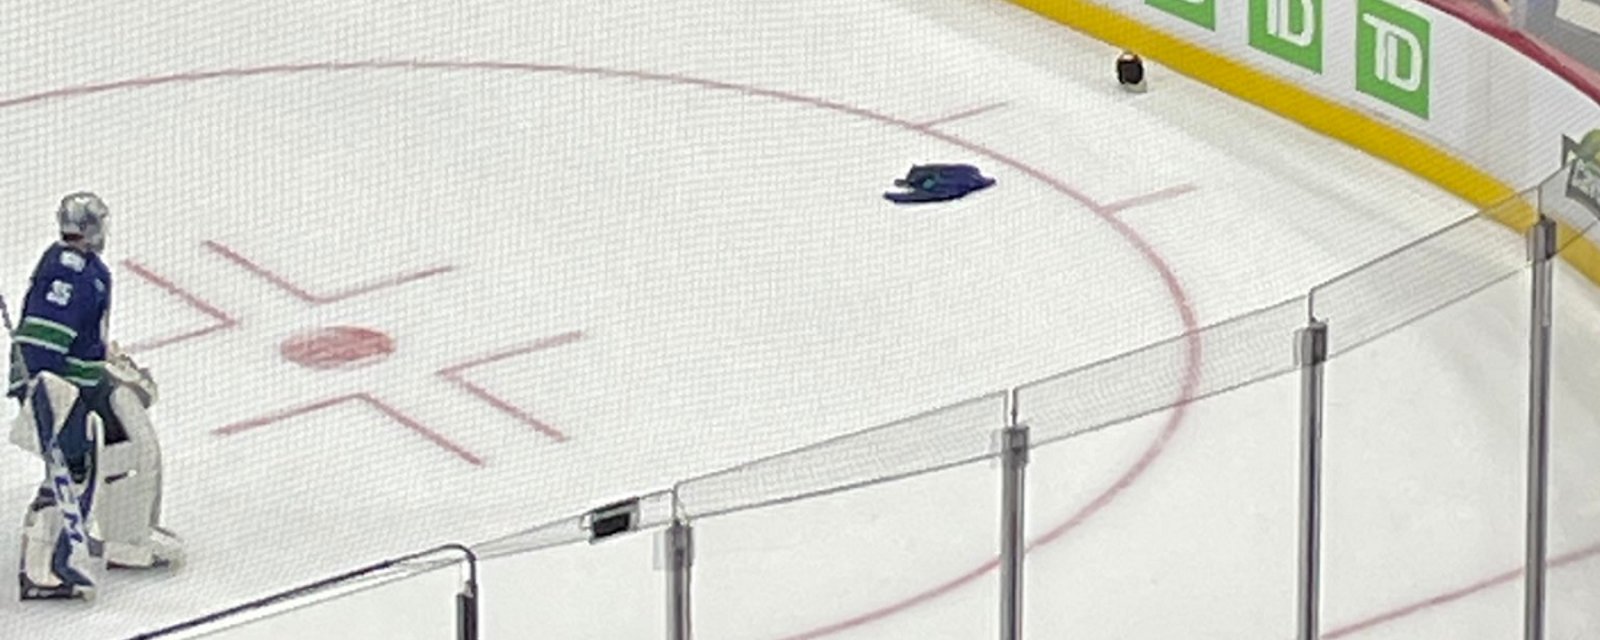 Multiple jerseys thrown on the ice in Canucks home opener.